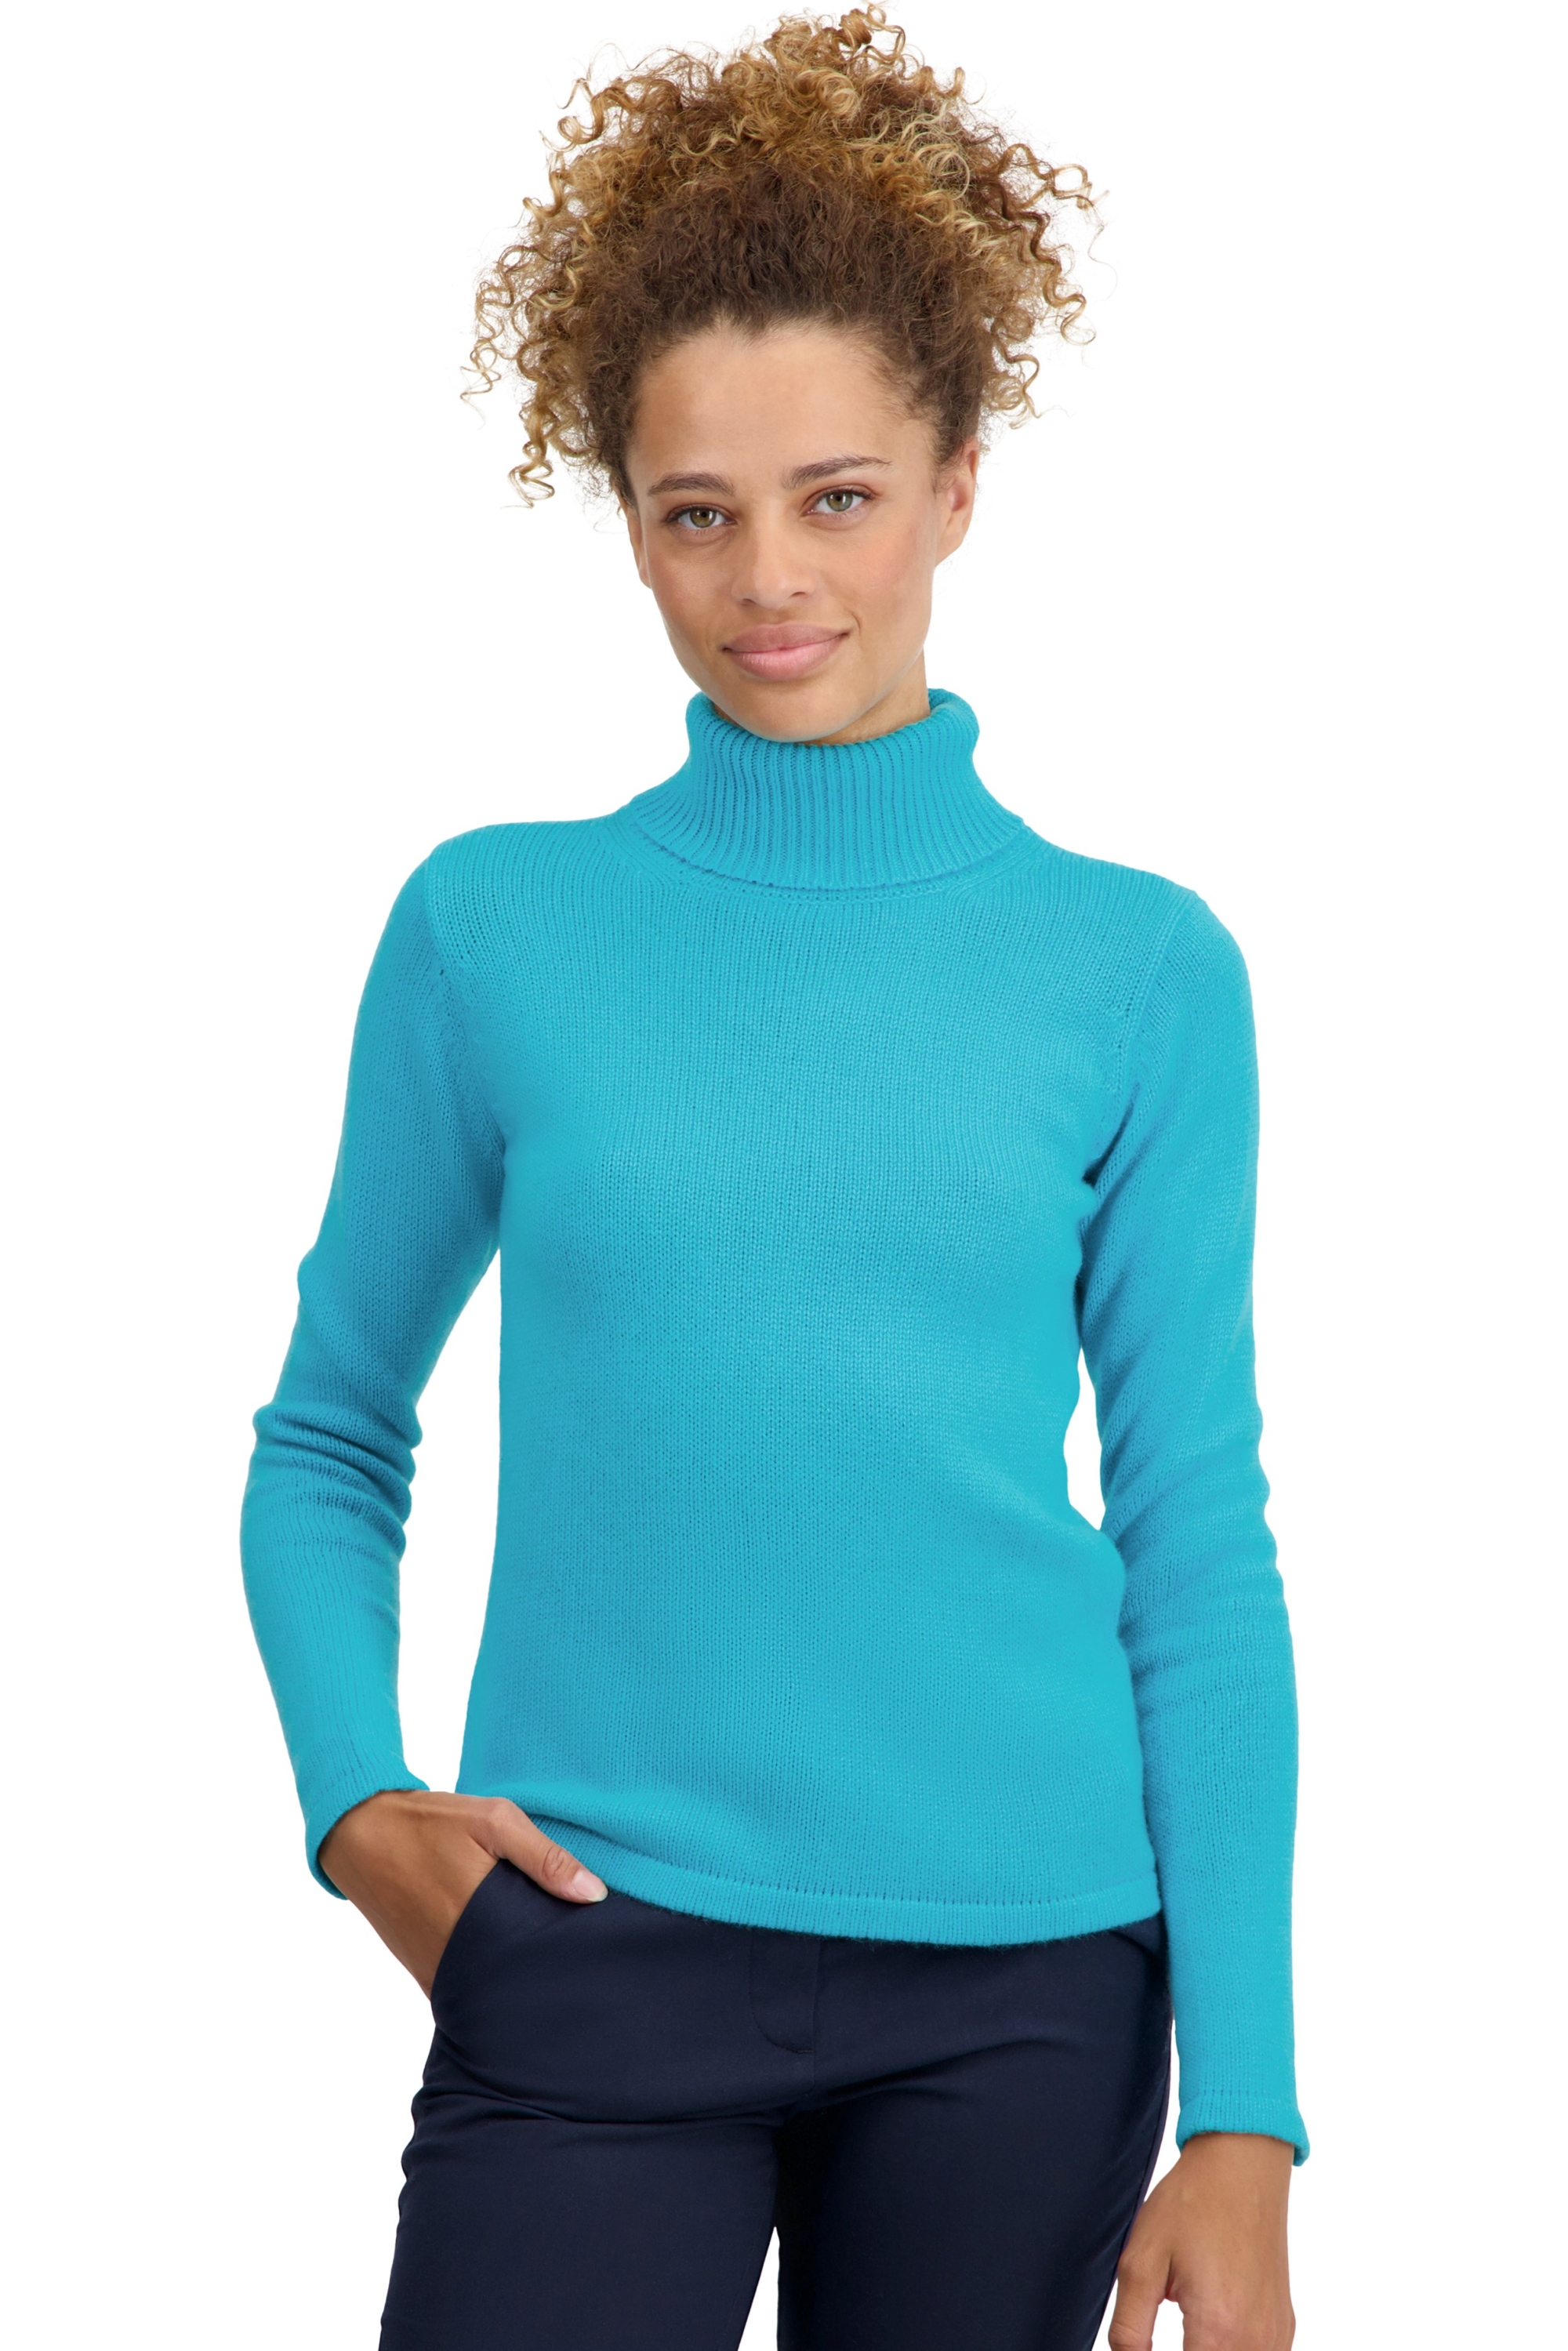 Cashmere ladies basic sweaters at low prices taipei first kingfisher s